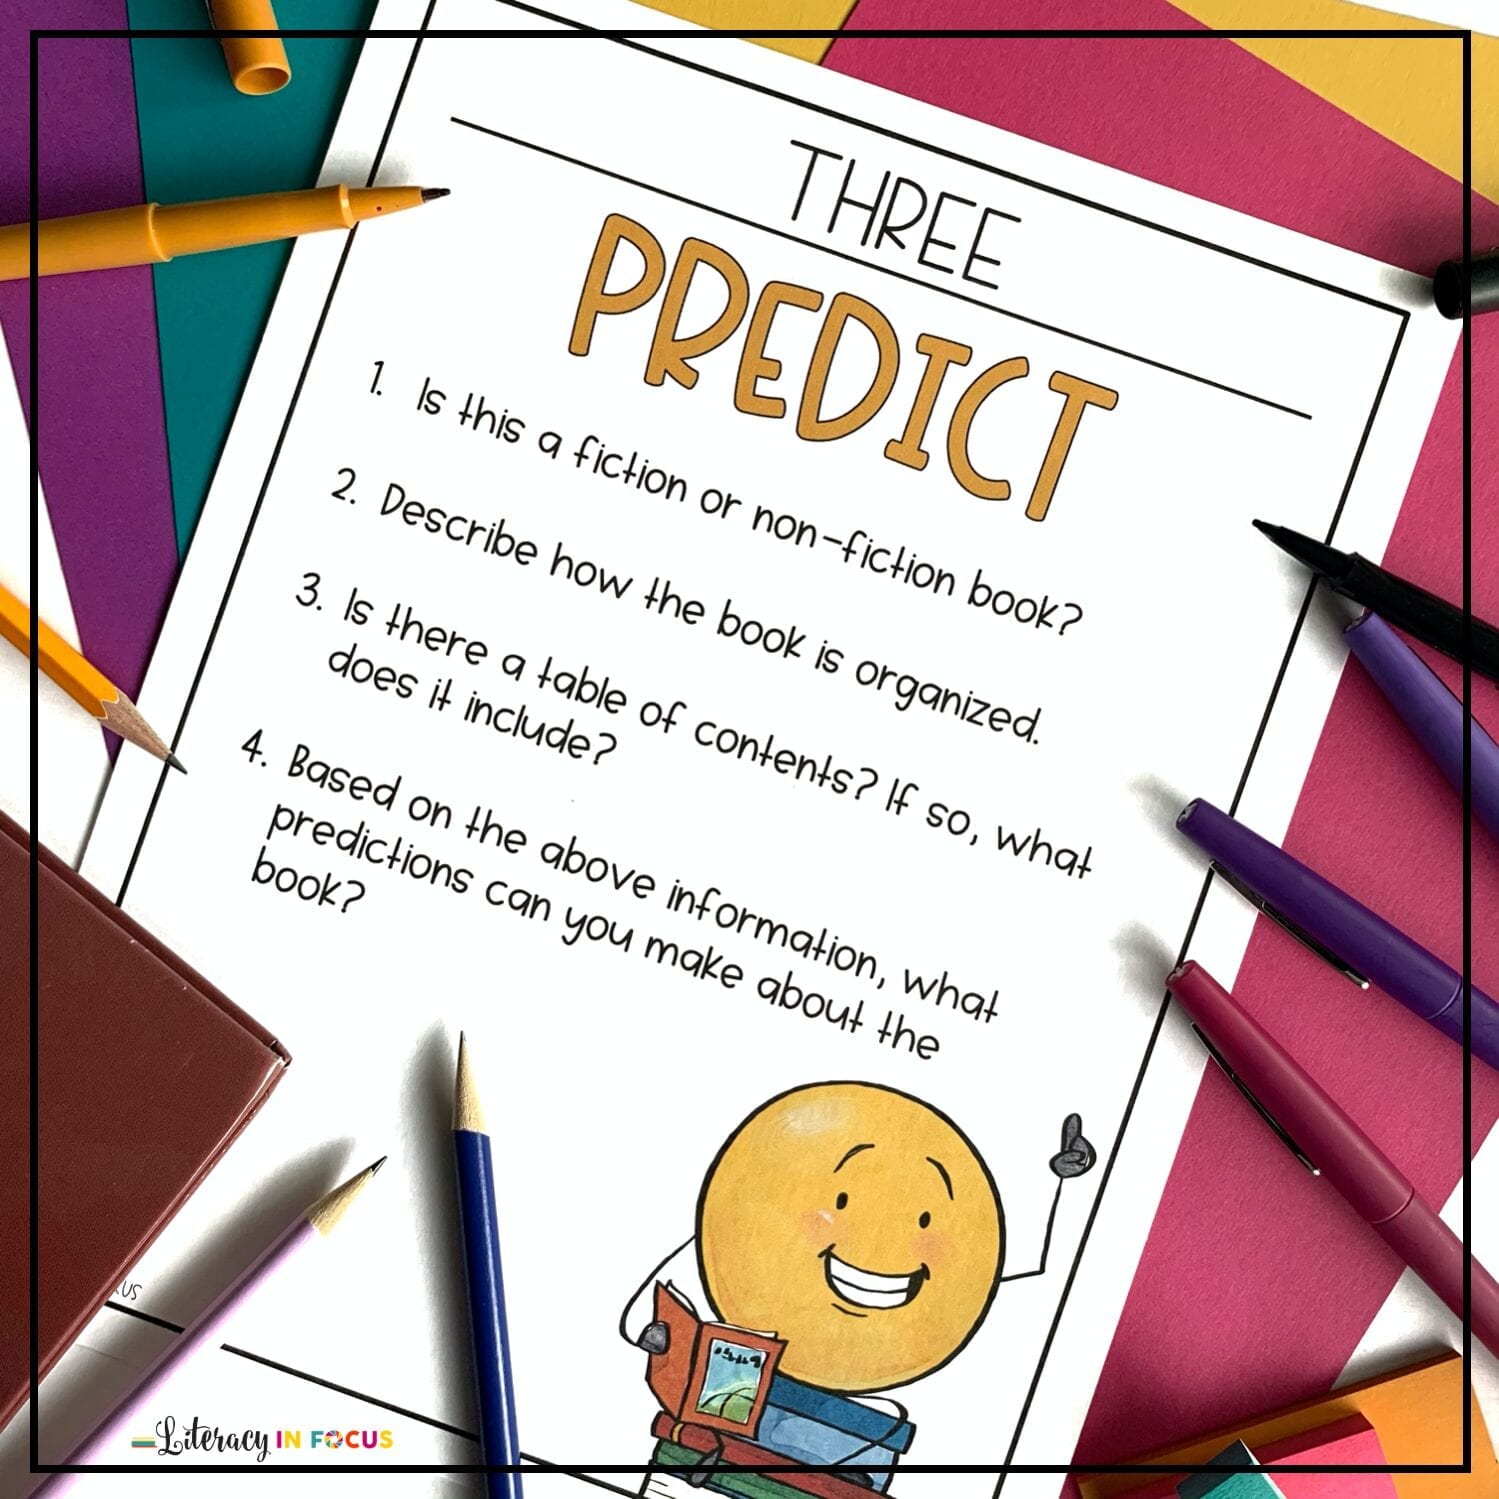 Novel Prereading Activity for Small Groups